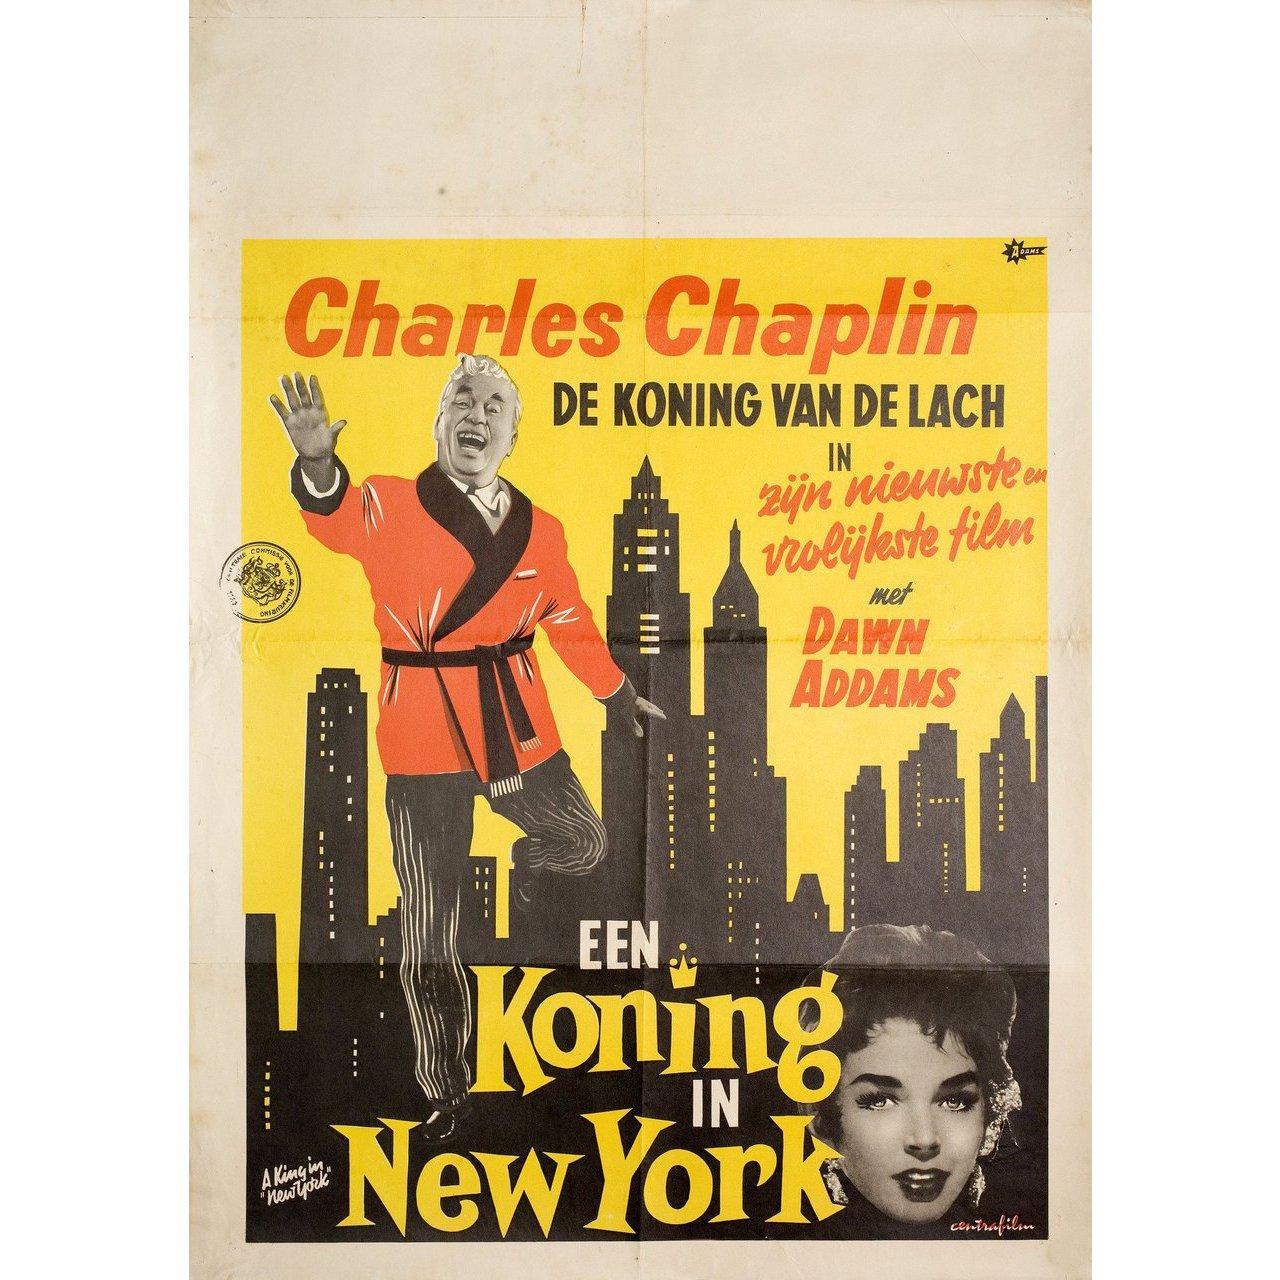 Original 1957 Dutch poster by Adams for the film A King in New York directed by Charles Chaplin with Charles Chaplin / Maxine Audley / Jerry Desmonde / Oliver Johnston. Very good condition, folded with tape on back. Many original posters were issued